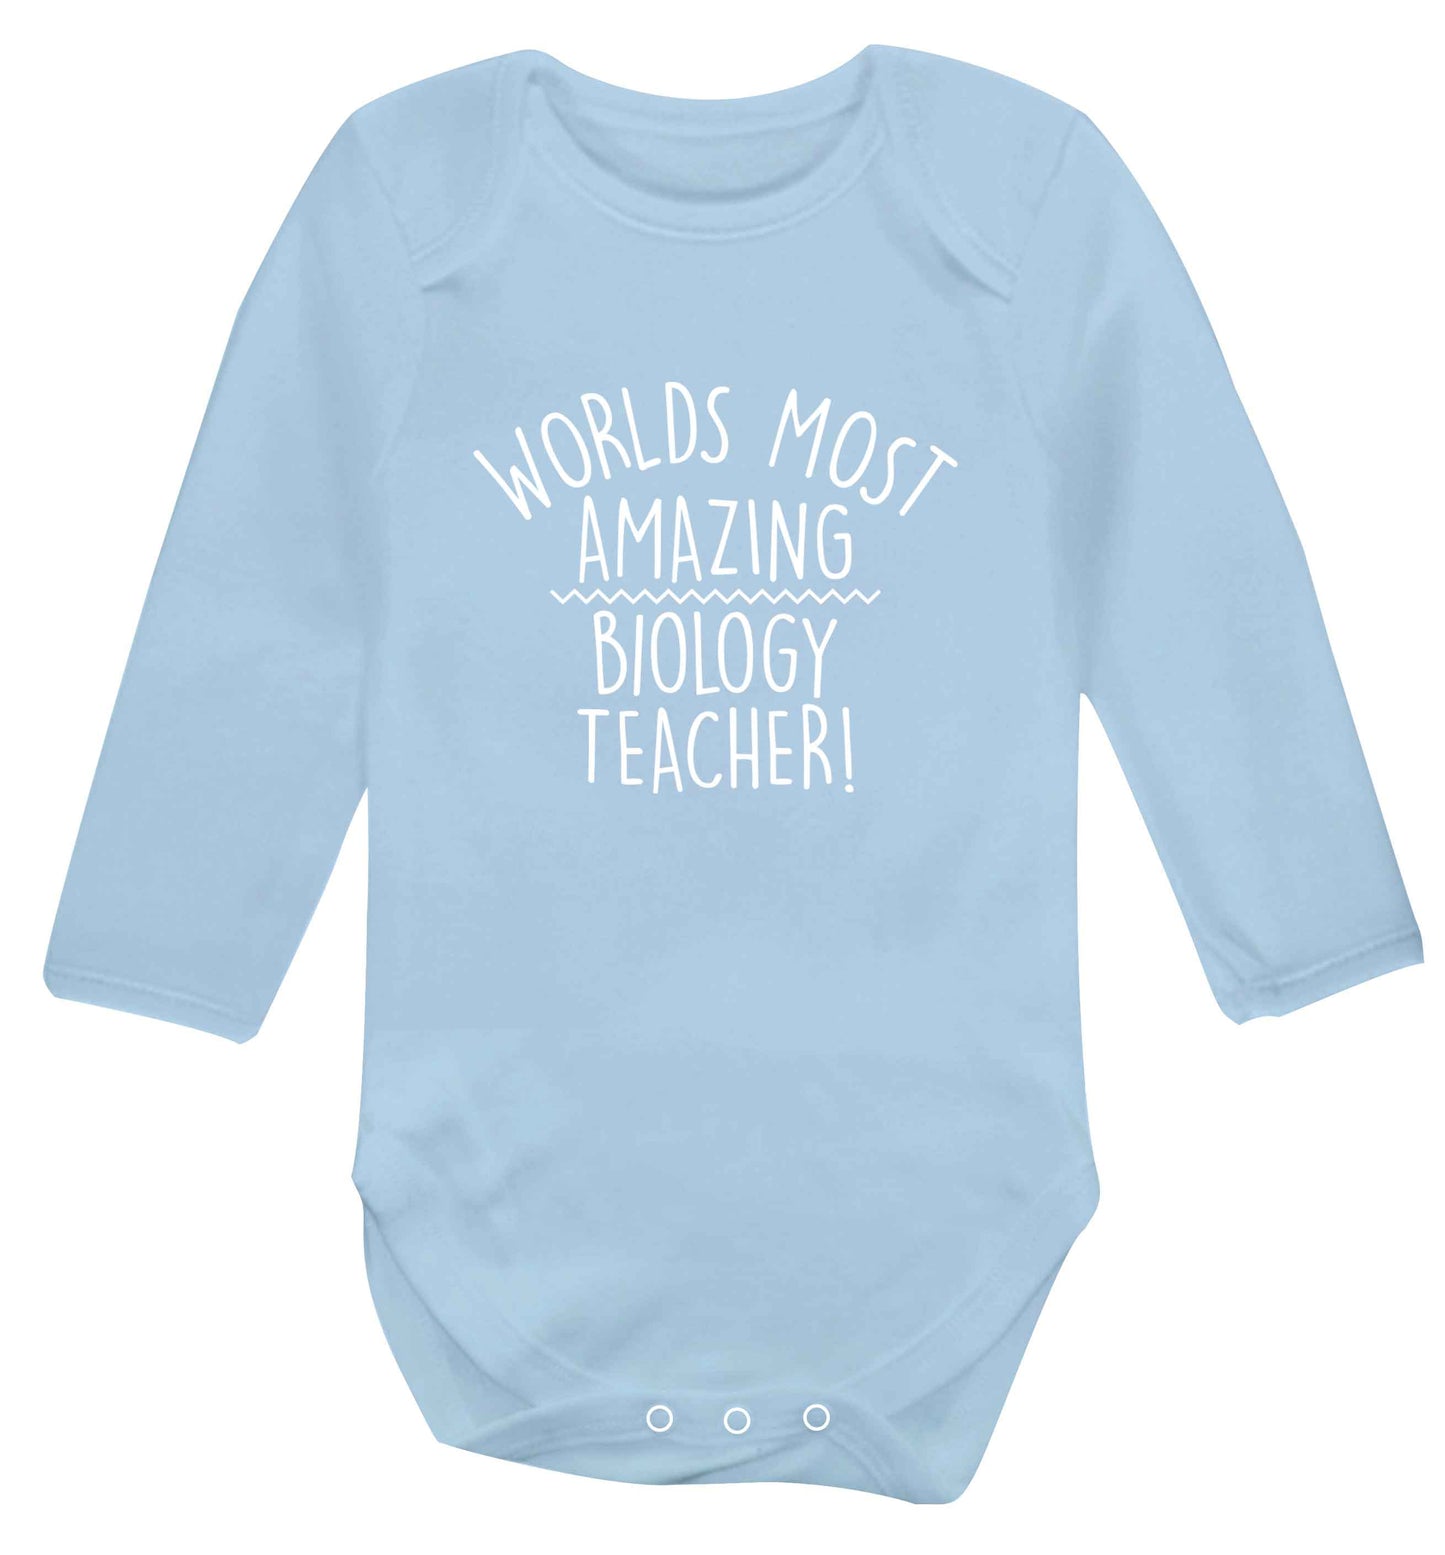 Worlds most amazing biology teacher baby vest long sleeved pale blue 6-12 months